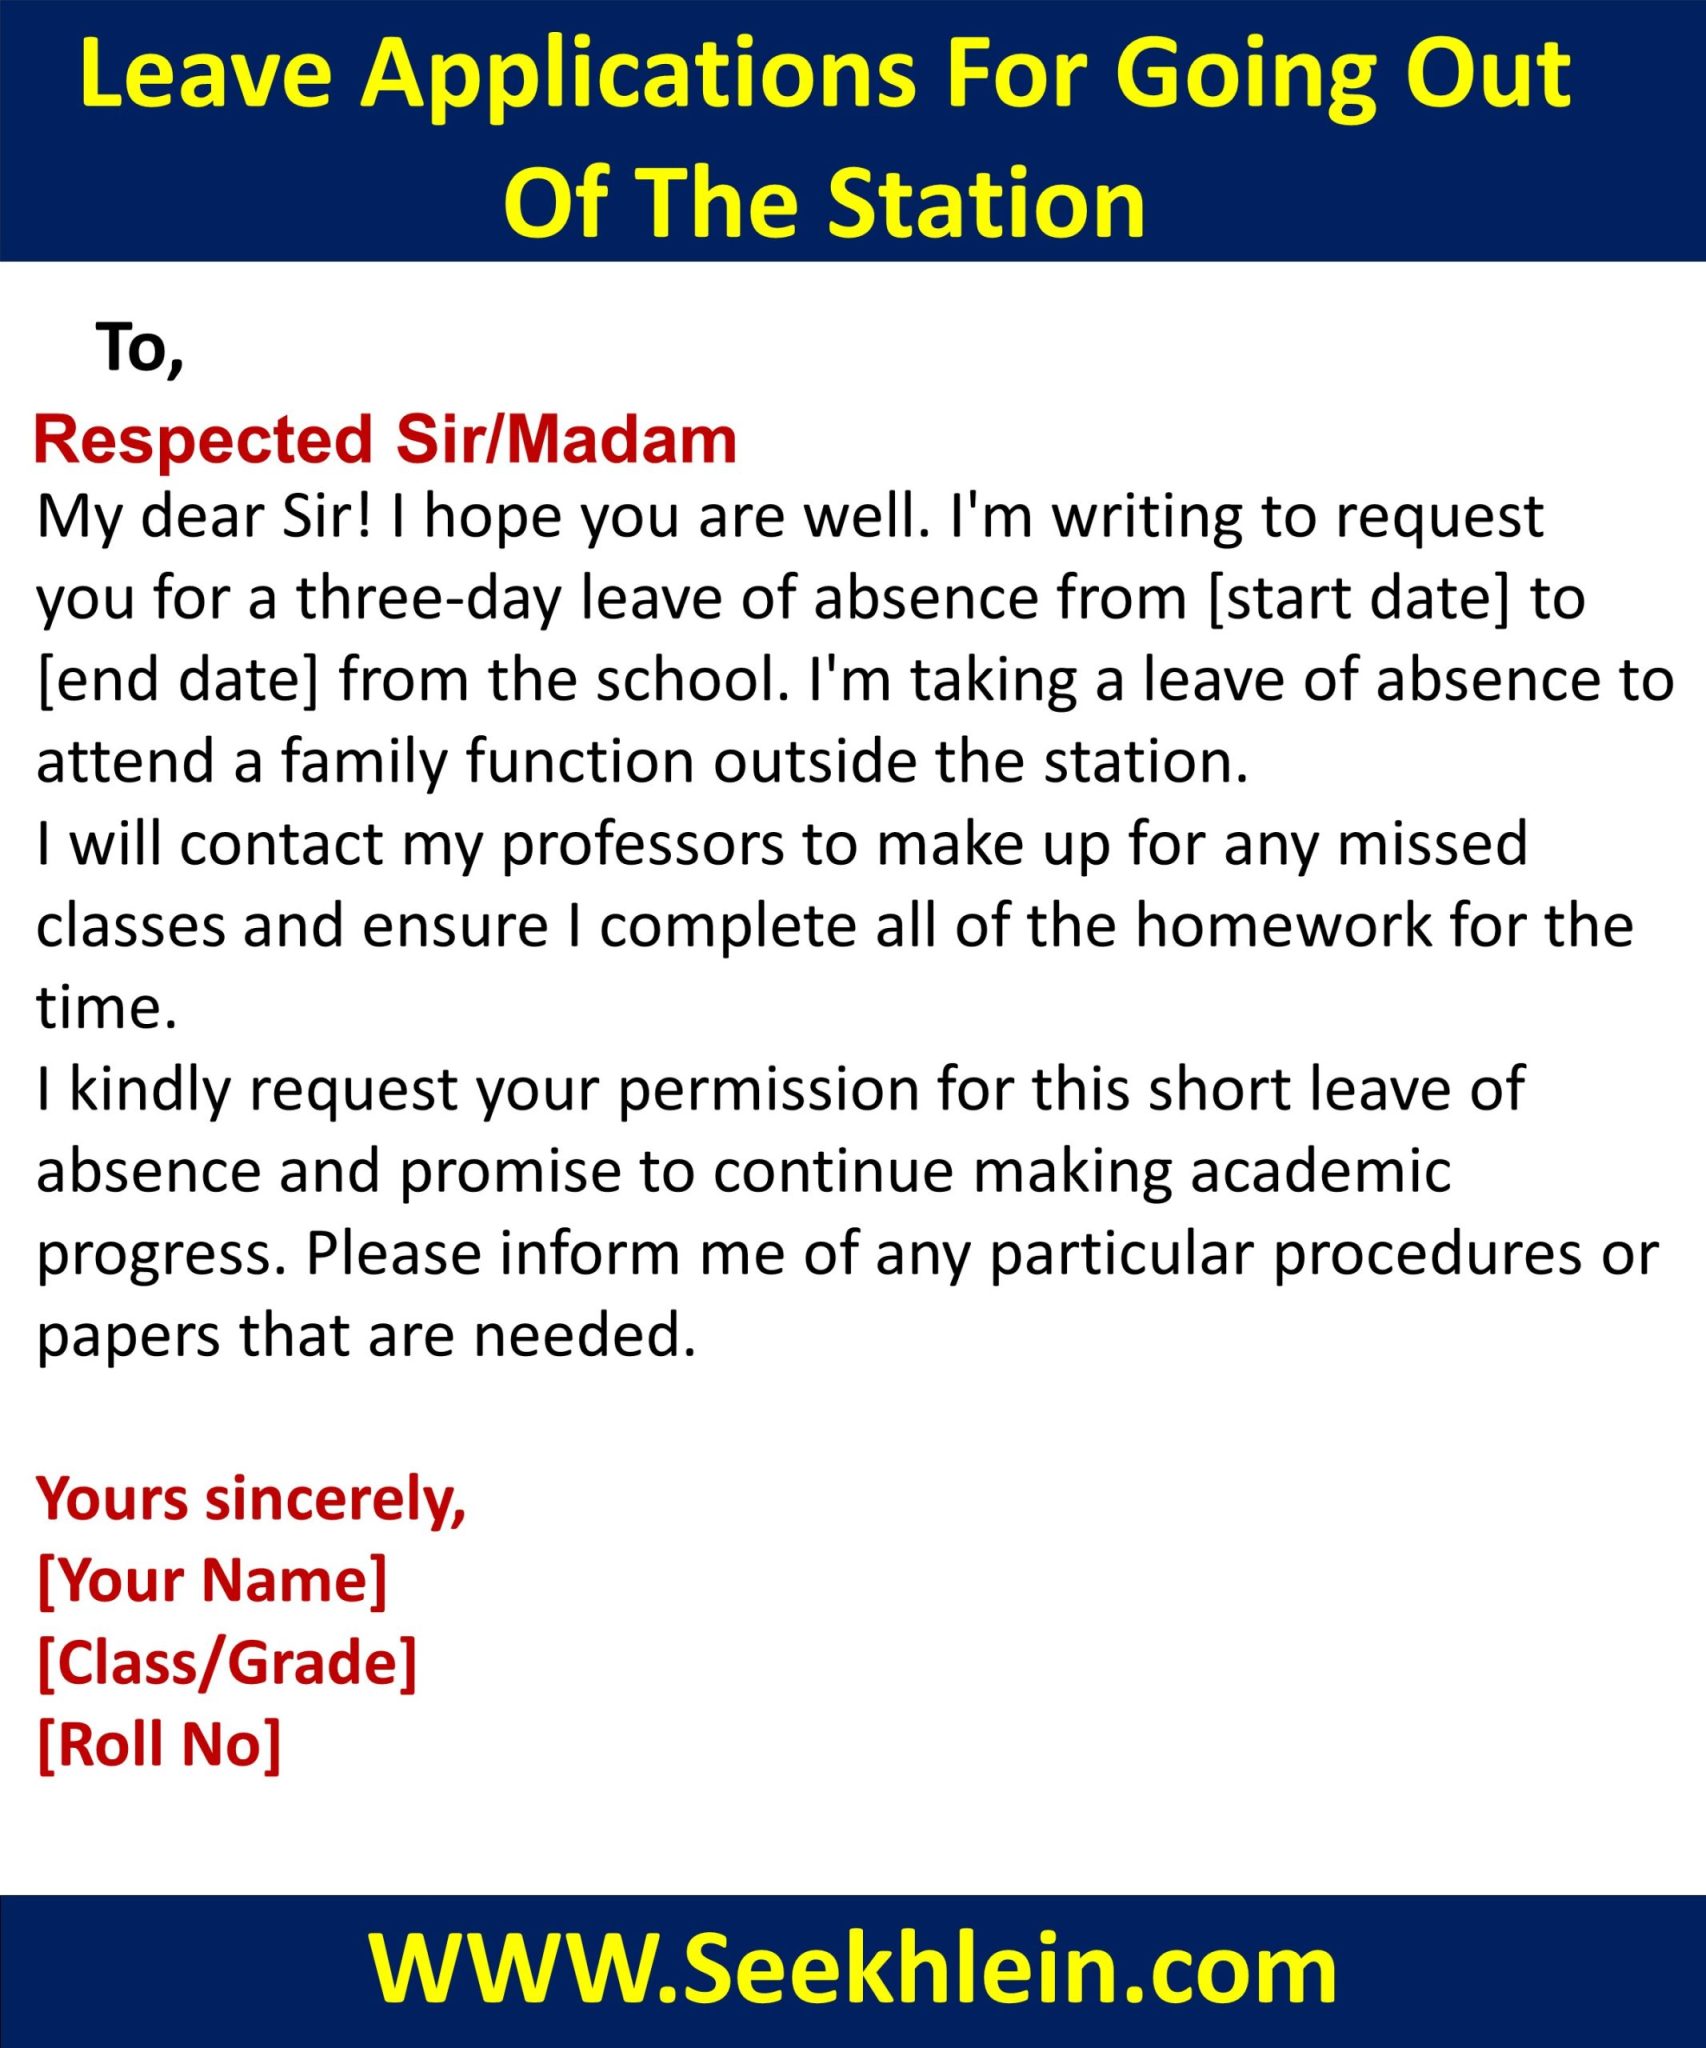 Application  For 3 Days Leave For Going Out Station